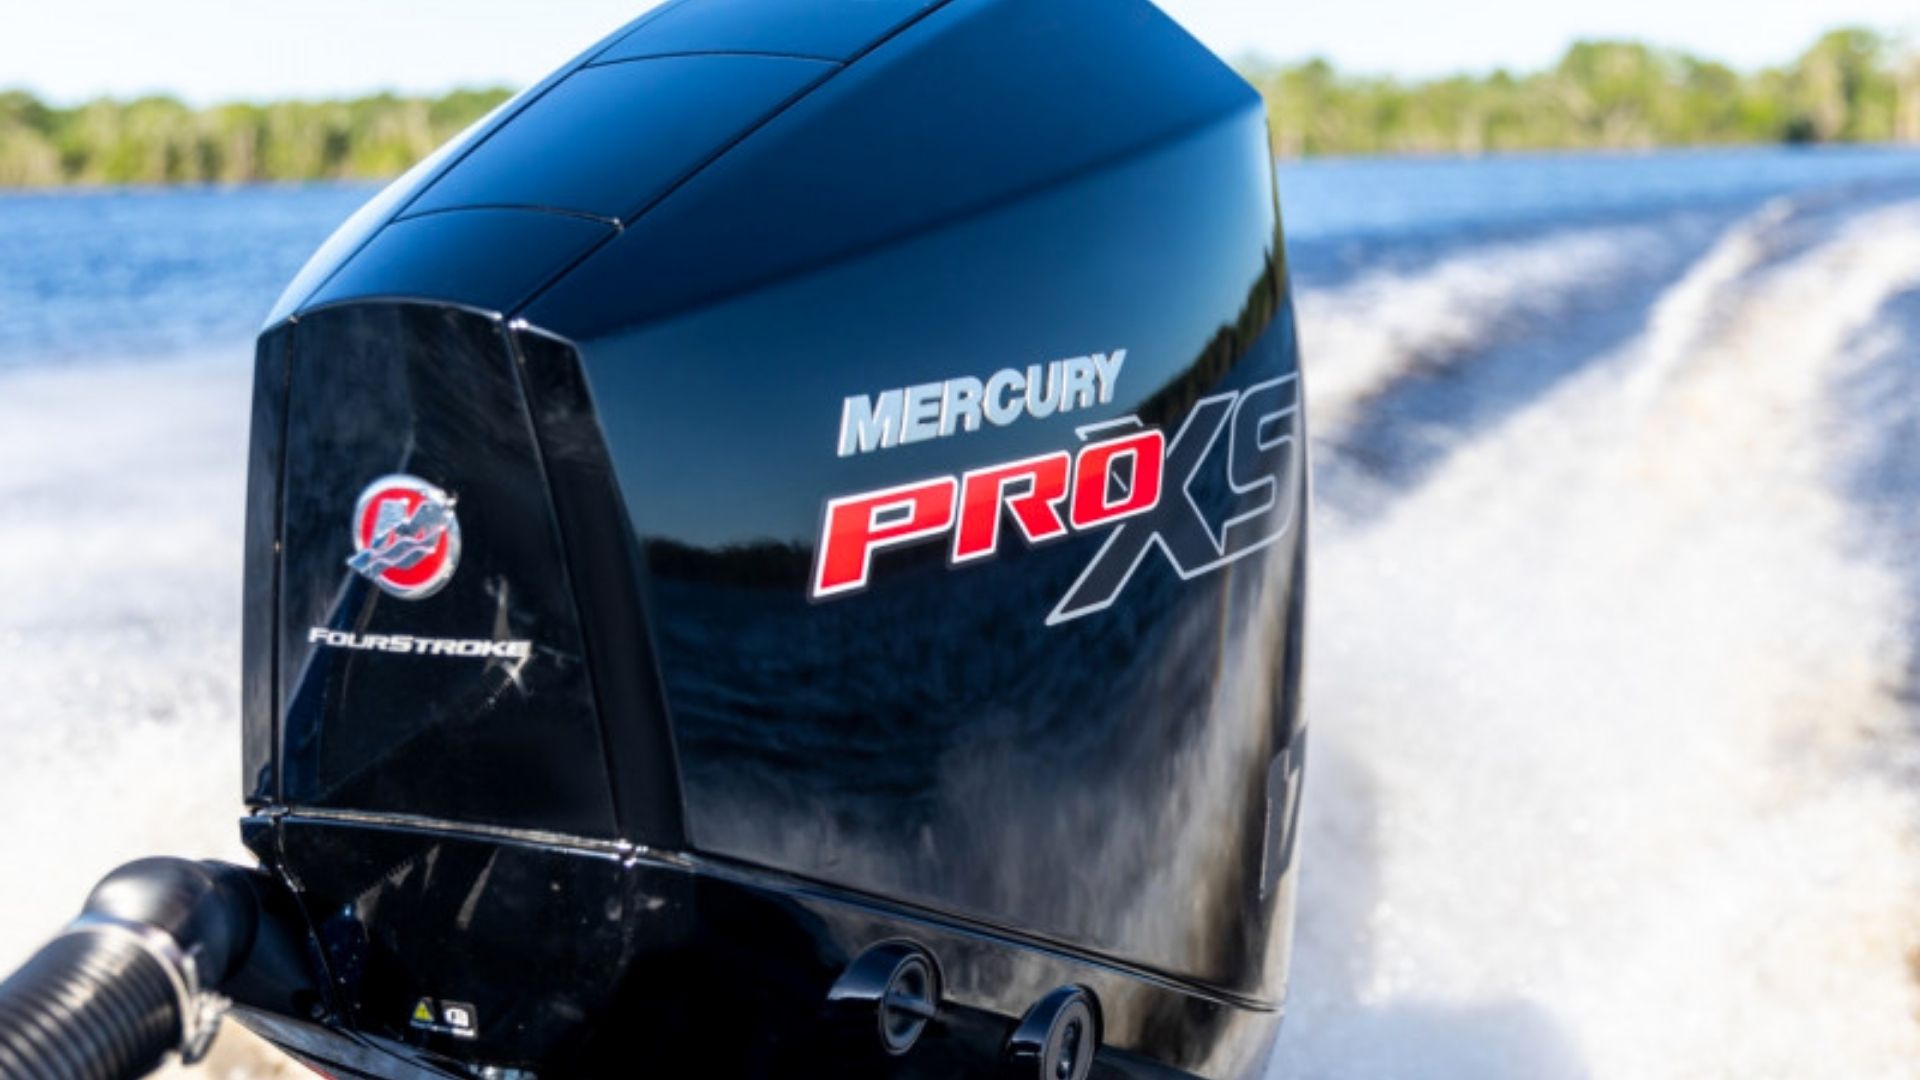 7 reasons to upgrade your old outboard motor